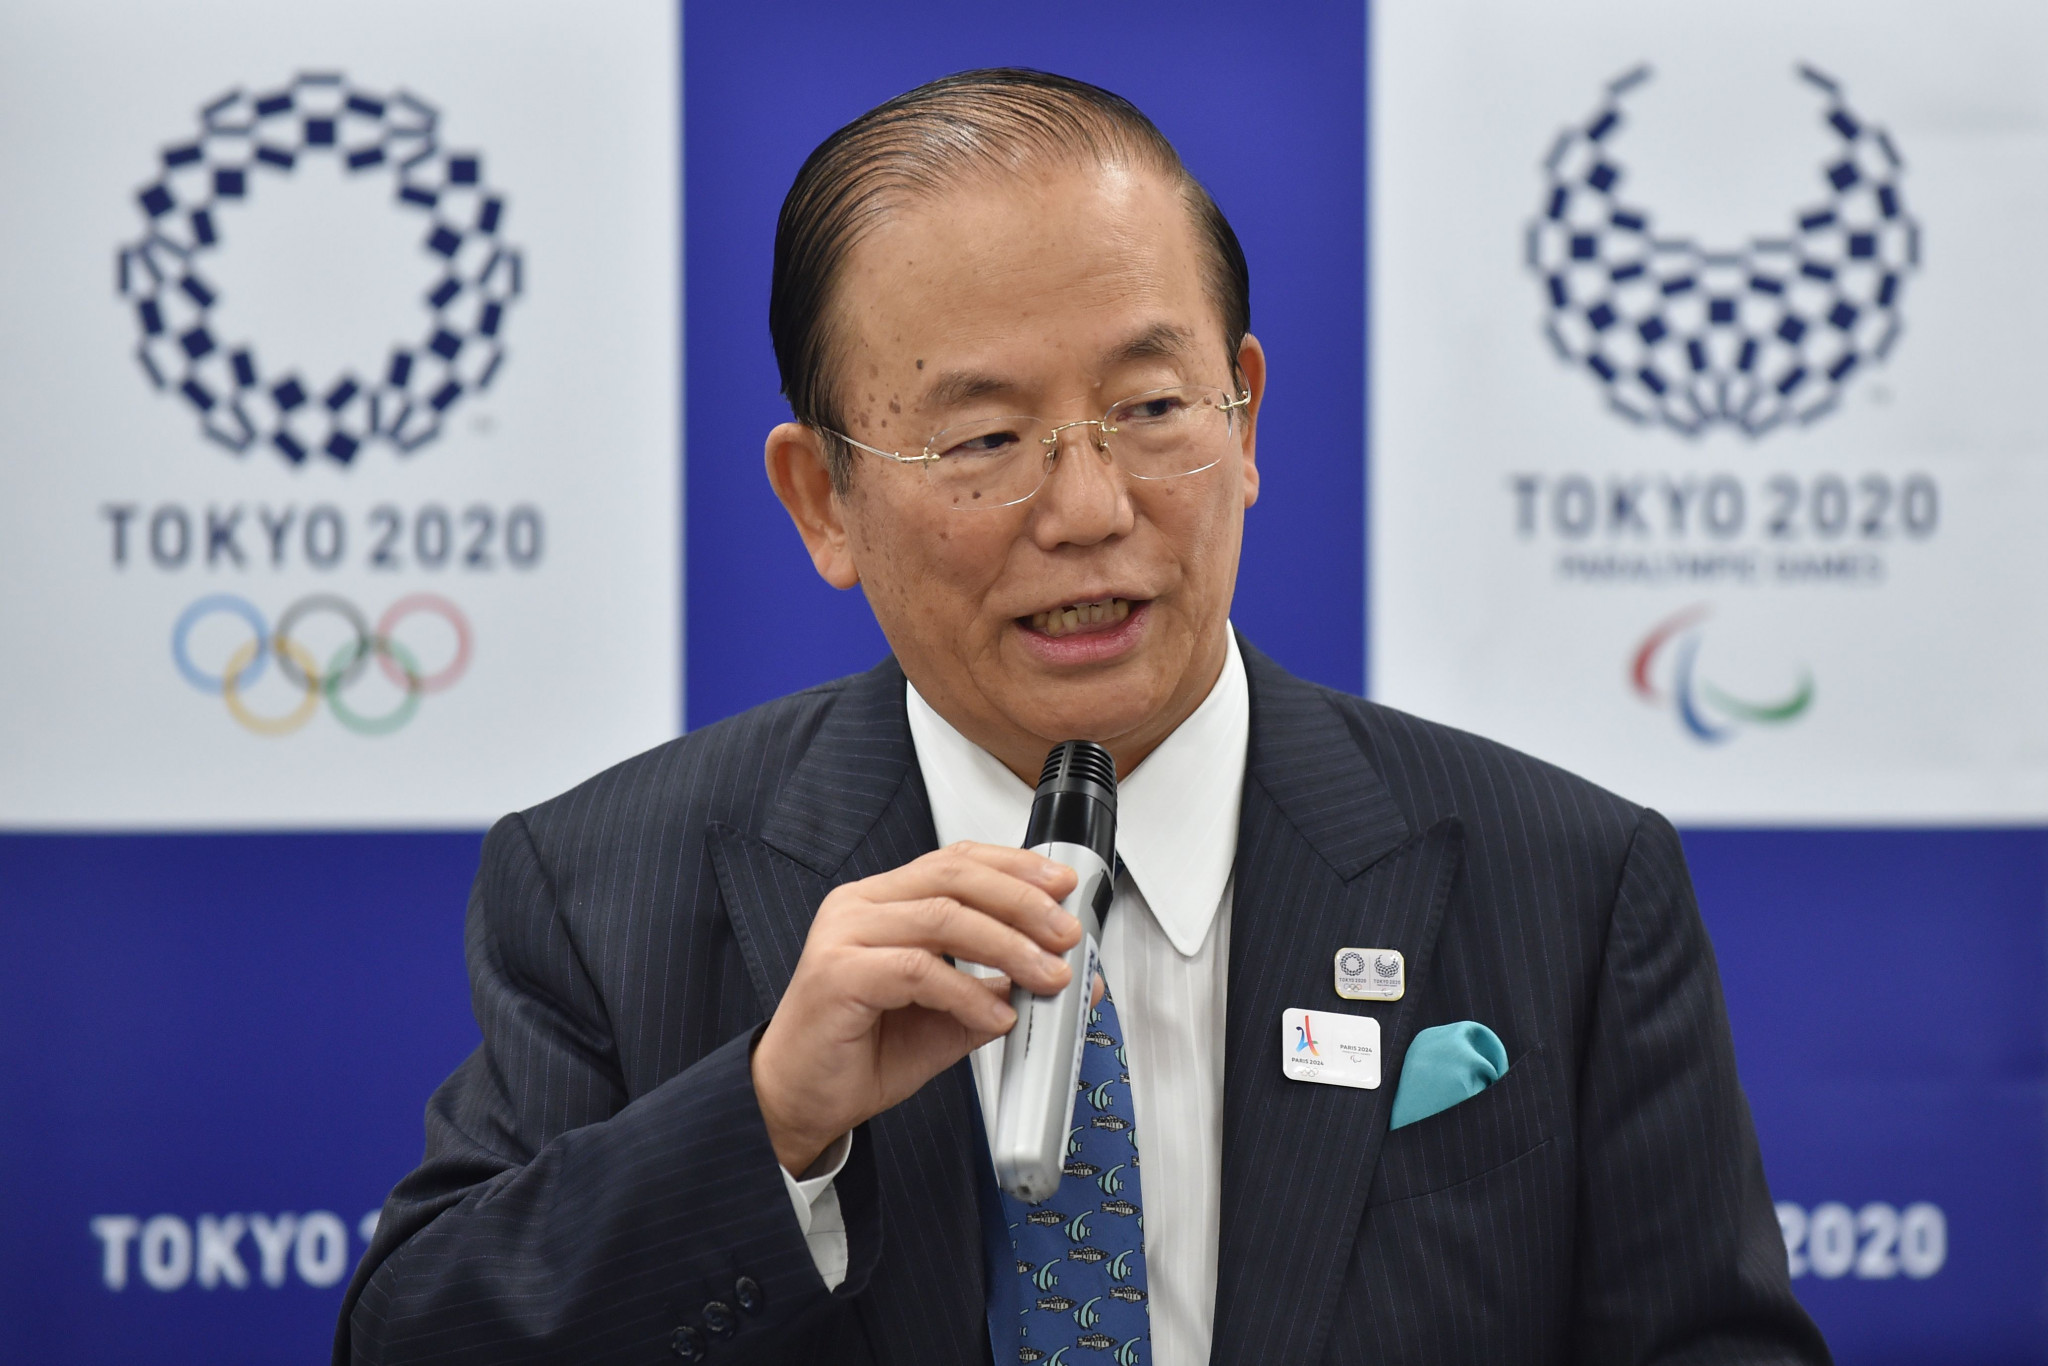 Tokyo 2020 chief executive vows to ensure Olympic and Paralympic Games cost remains within budget